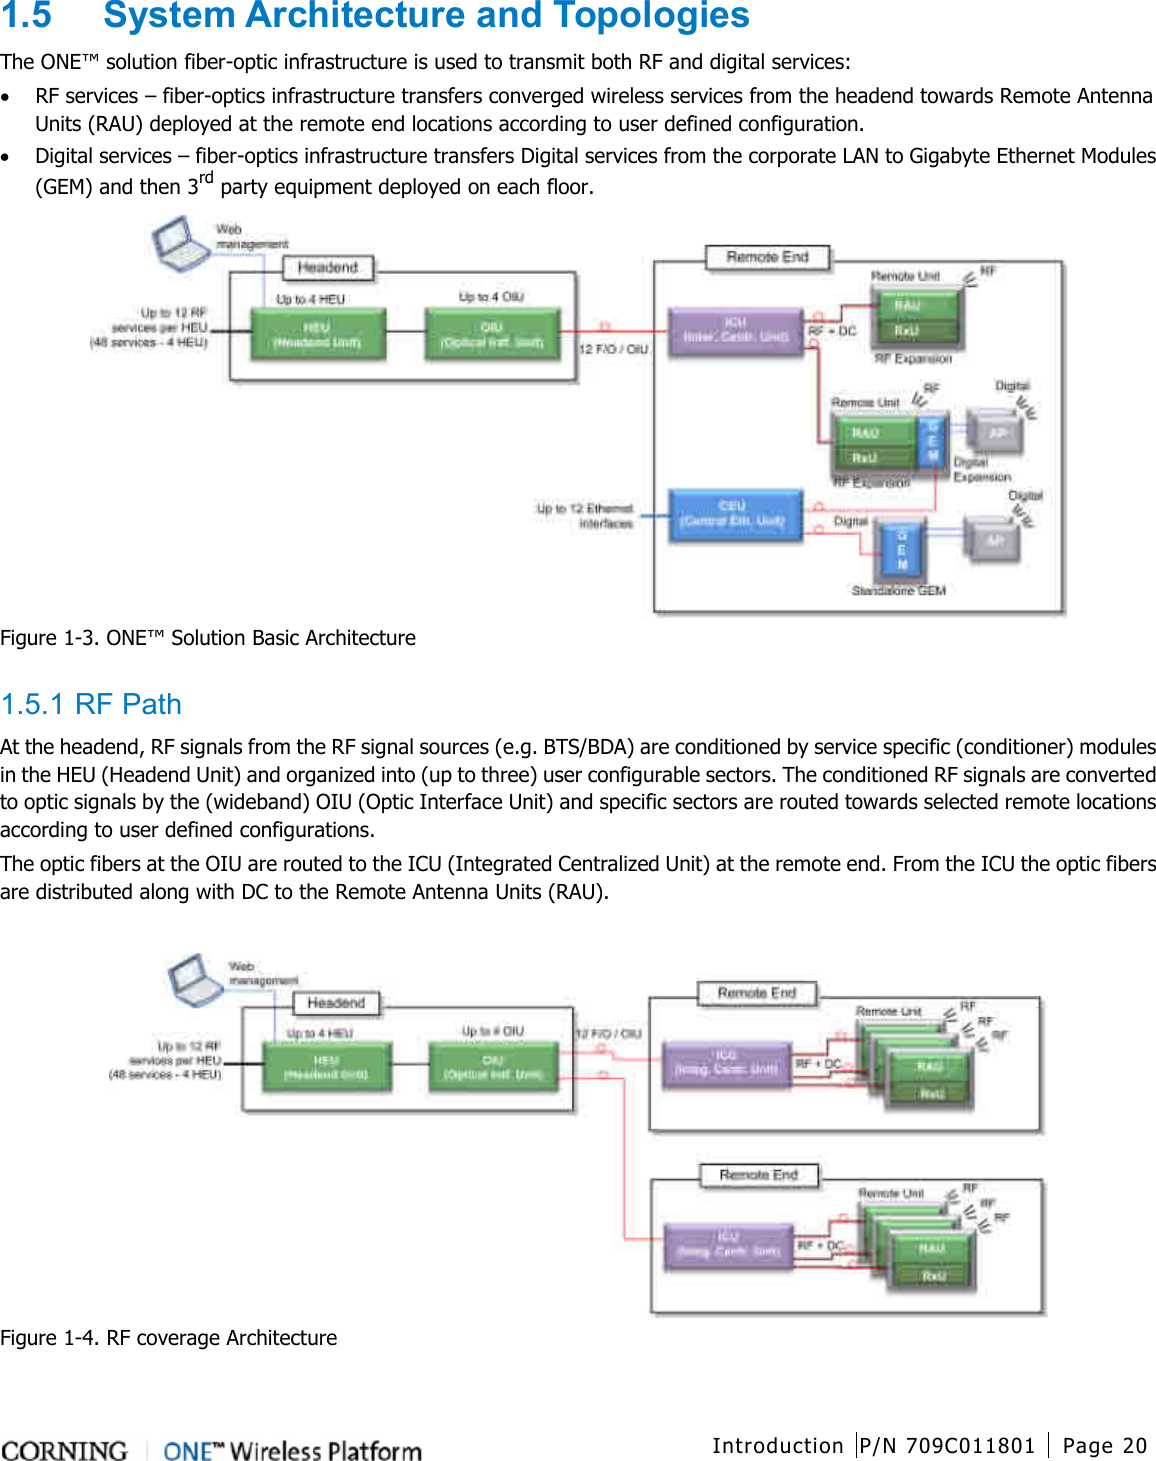  Introduction P/N 709C011801 Page 20   1.5  System Architecture and Topologies The ONE™ solution fiber-optic infrastructure is used to transmit both RF and digital services: • RF services – fiber-optics infrastructure transfers converged wireless services from the headend towards Remote Antenna Units (RAU) deployed at the remote end locations according to user defined configuration. • Digital services – fiber-optics infrastructure transfers Digital services from the corporate LAN to Gigabyte Ethernet Modules (GEM) and then 3rd party equipment deployed on each floor.  Figure  1-3. ONE™ Solution Basic Architecture  1.5.1 RF Path At the headend, RF signals from the RF signal sources (e.g. BTS/BDA) are conditioned by service specific (conditioner) modules in the HEU (Headend Unit) and organized into (up to three) user configurable sectors. The conditioned RF signals are converted to optic signals by the (wideband) OIU (Optic Interface Unit) and specific sectors are routed towards selected remote locations according to user defined configurations. The optic fibers at the OIU are routed to the ICU (Integrated Centralized Unit) at the remote end. From the ICU the optic fibers are distributed along with DC to the Remote Antenna Units (RAU).   Figure  1-4. RF coverage Architecture  